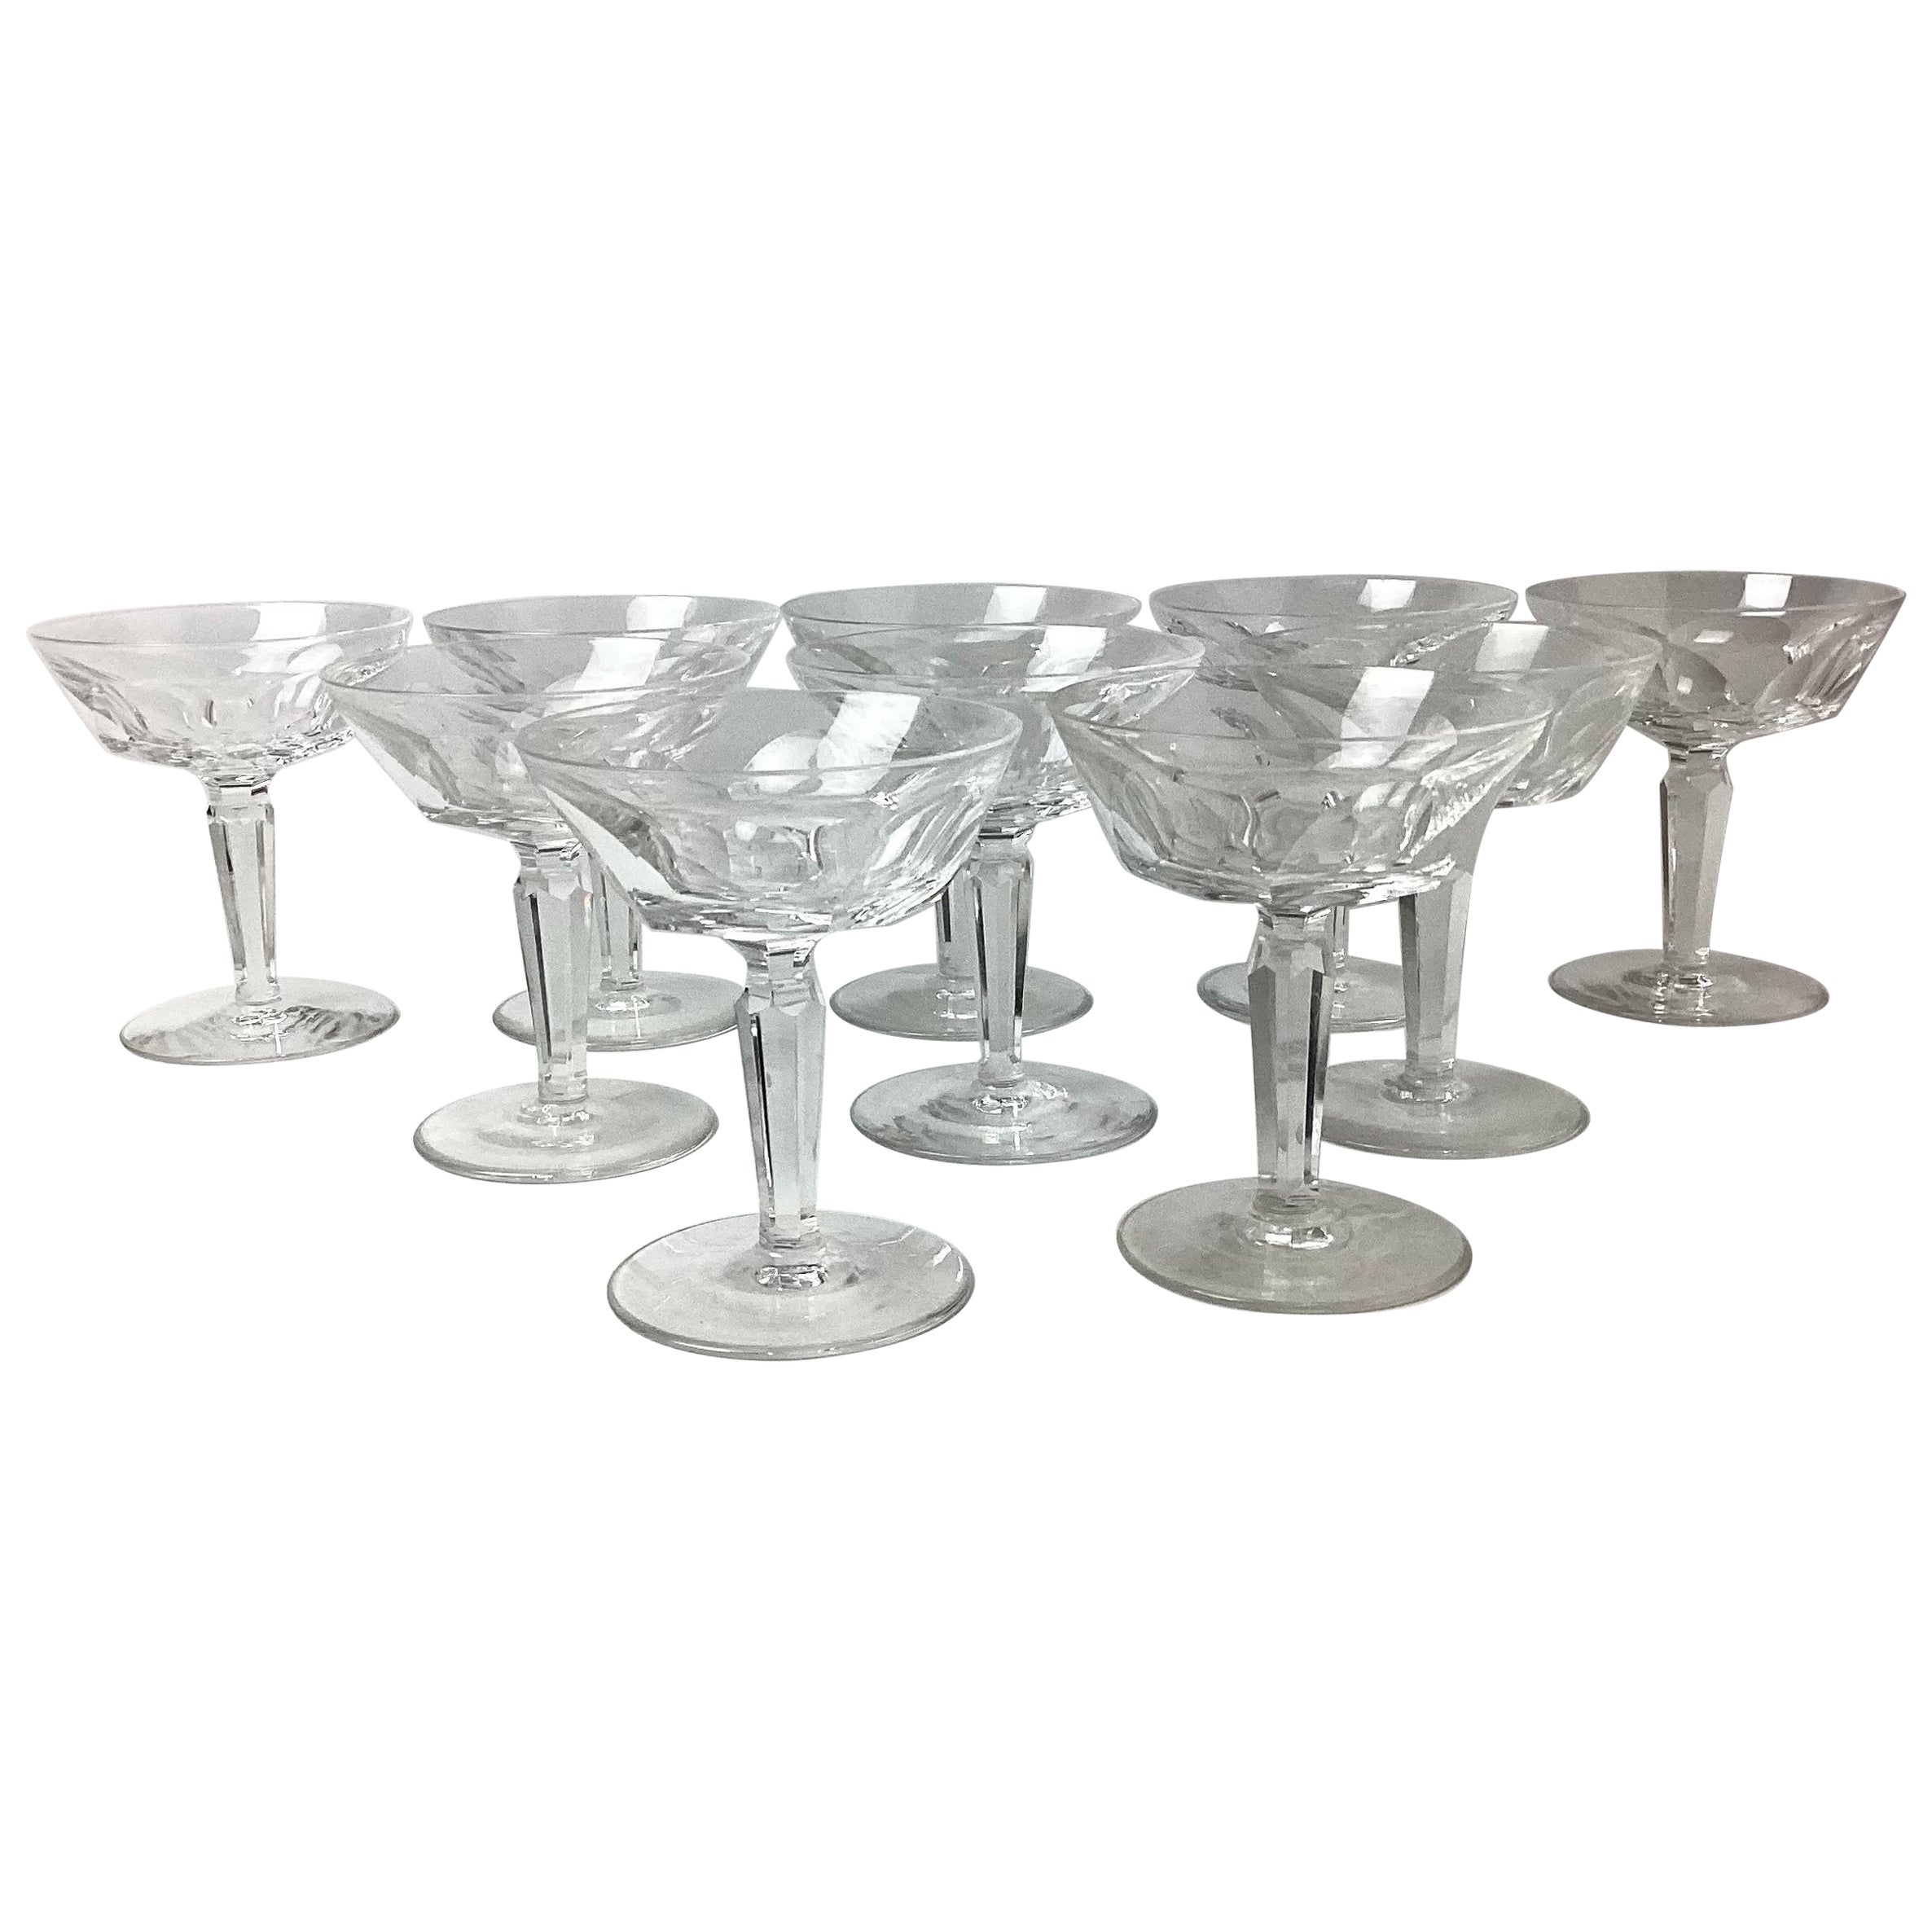 Set of 10 Waterford Sheila Cut Champagne or Tall Sherbet For Sale